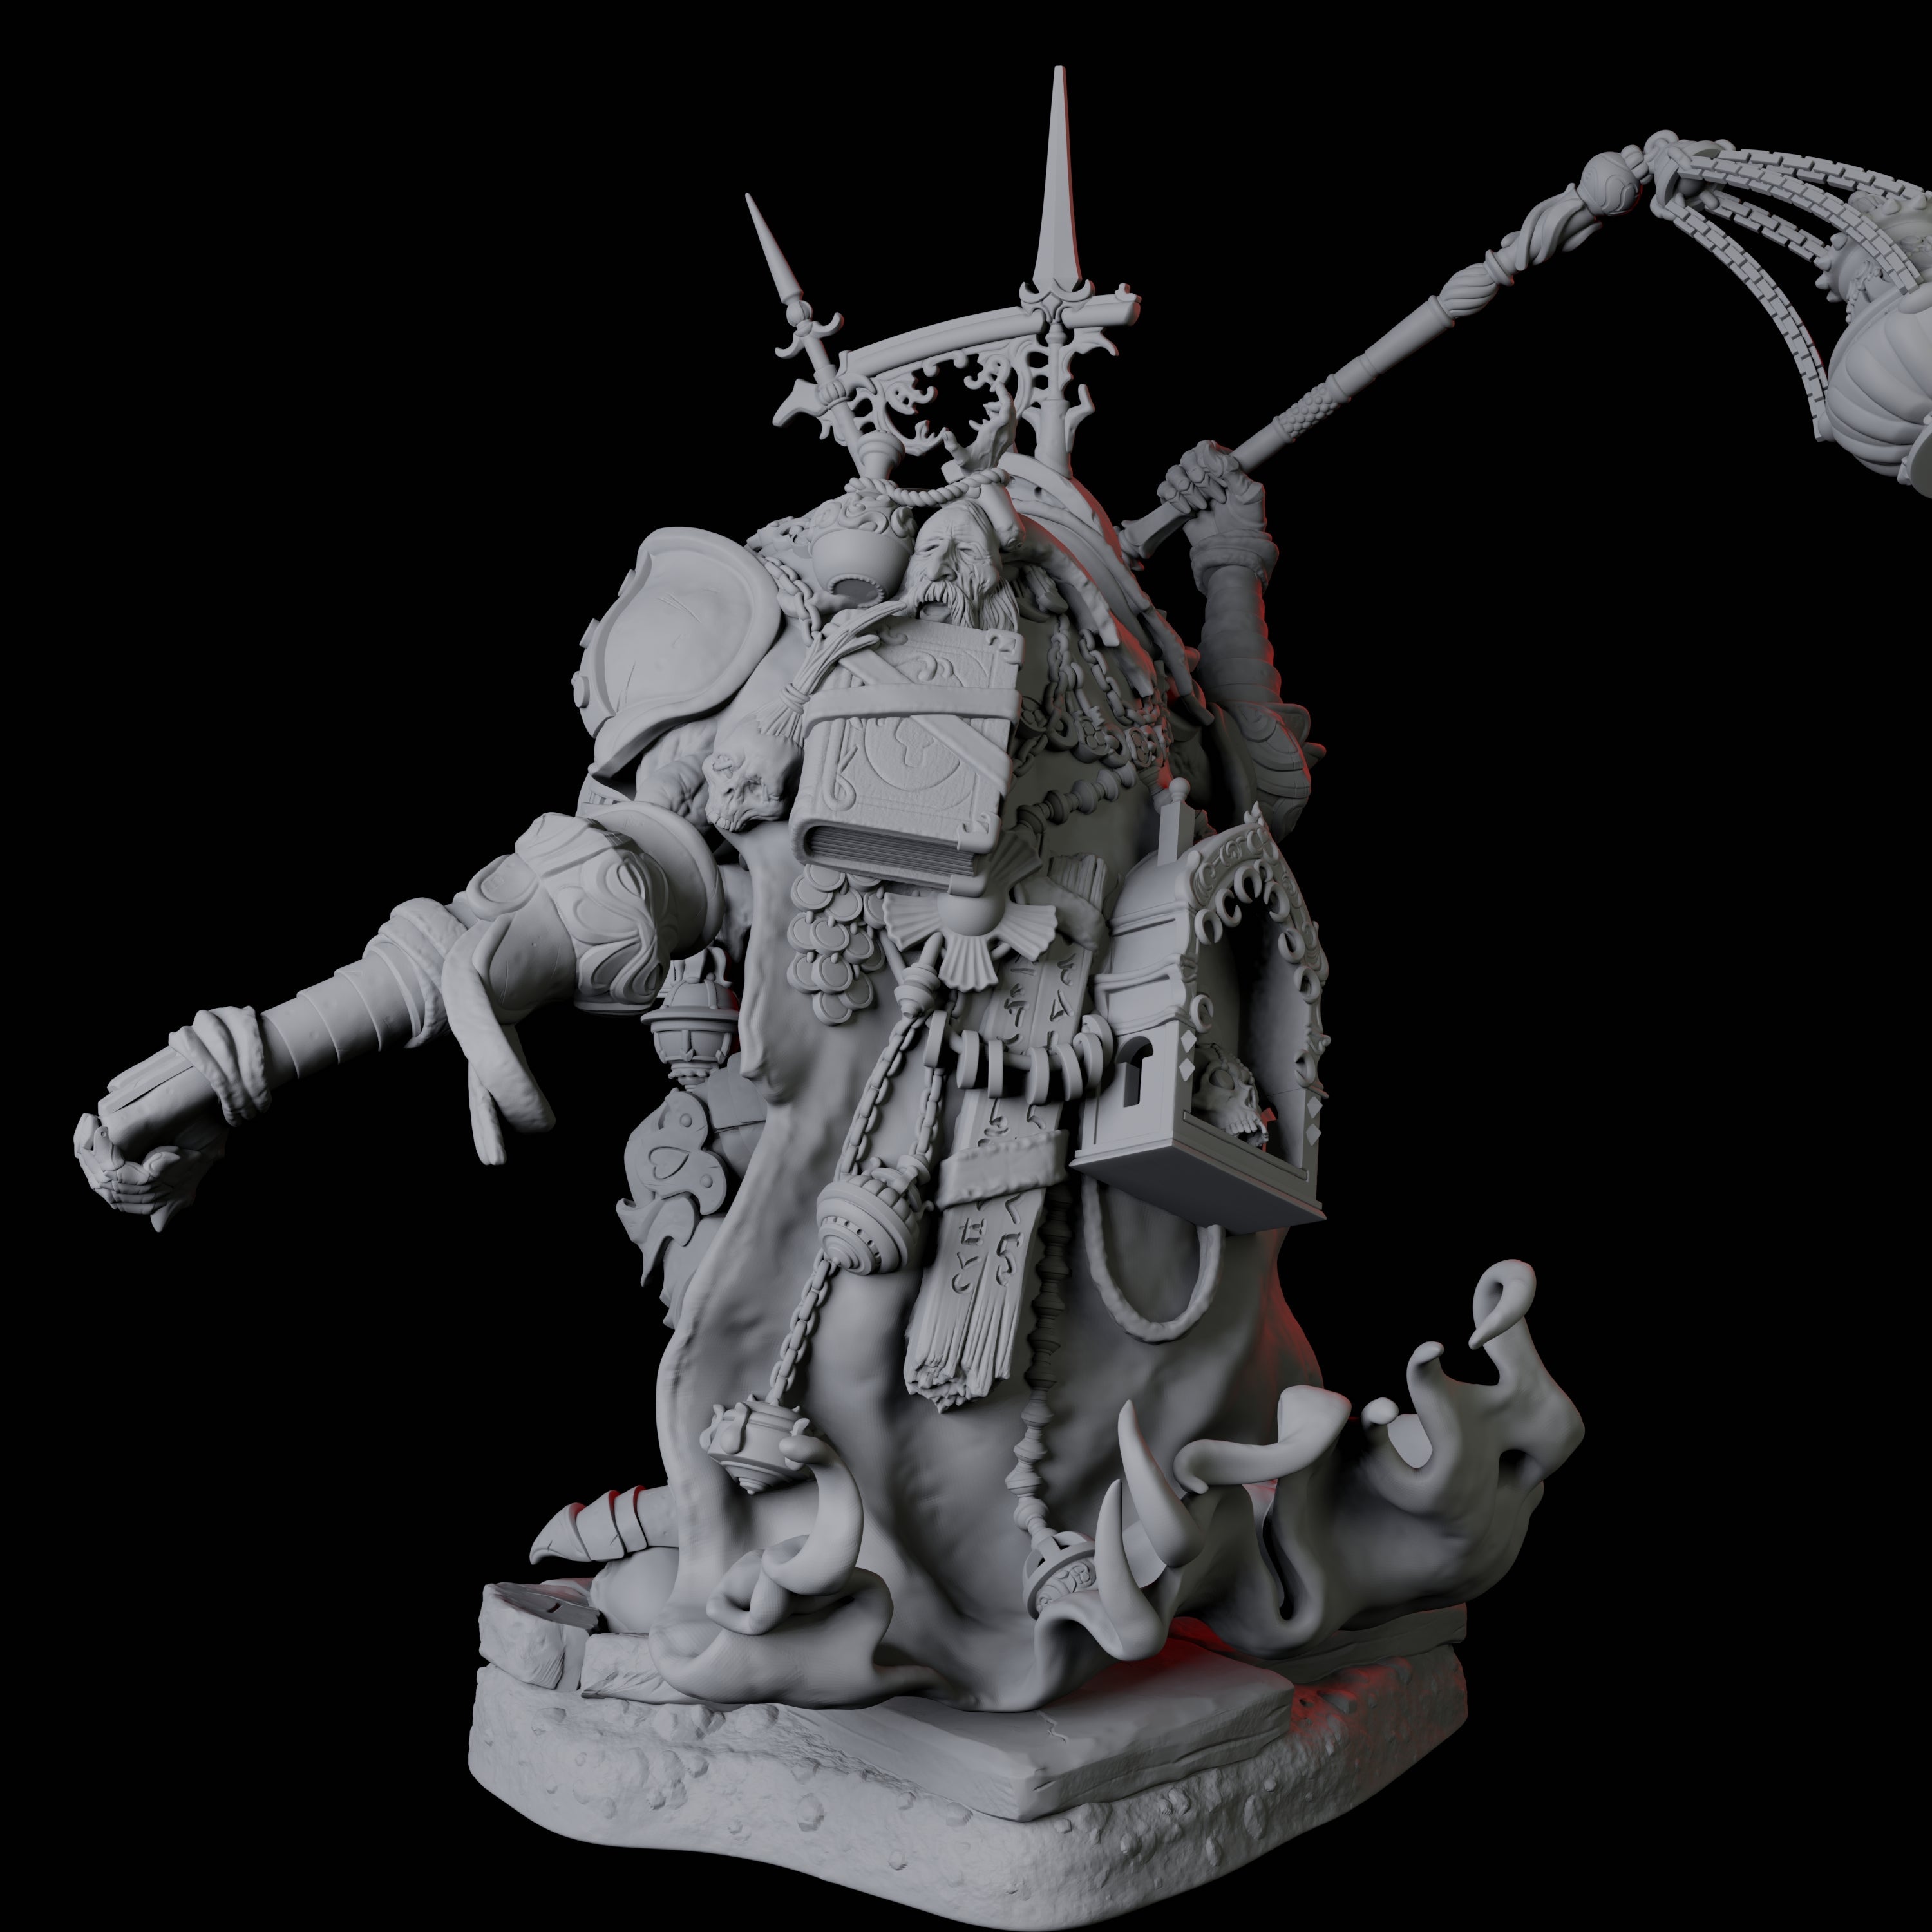 Undead Cultist D Miniature for Dungeons and Dragons, Pathfinder or other TTRPGs